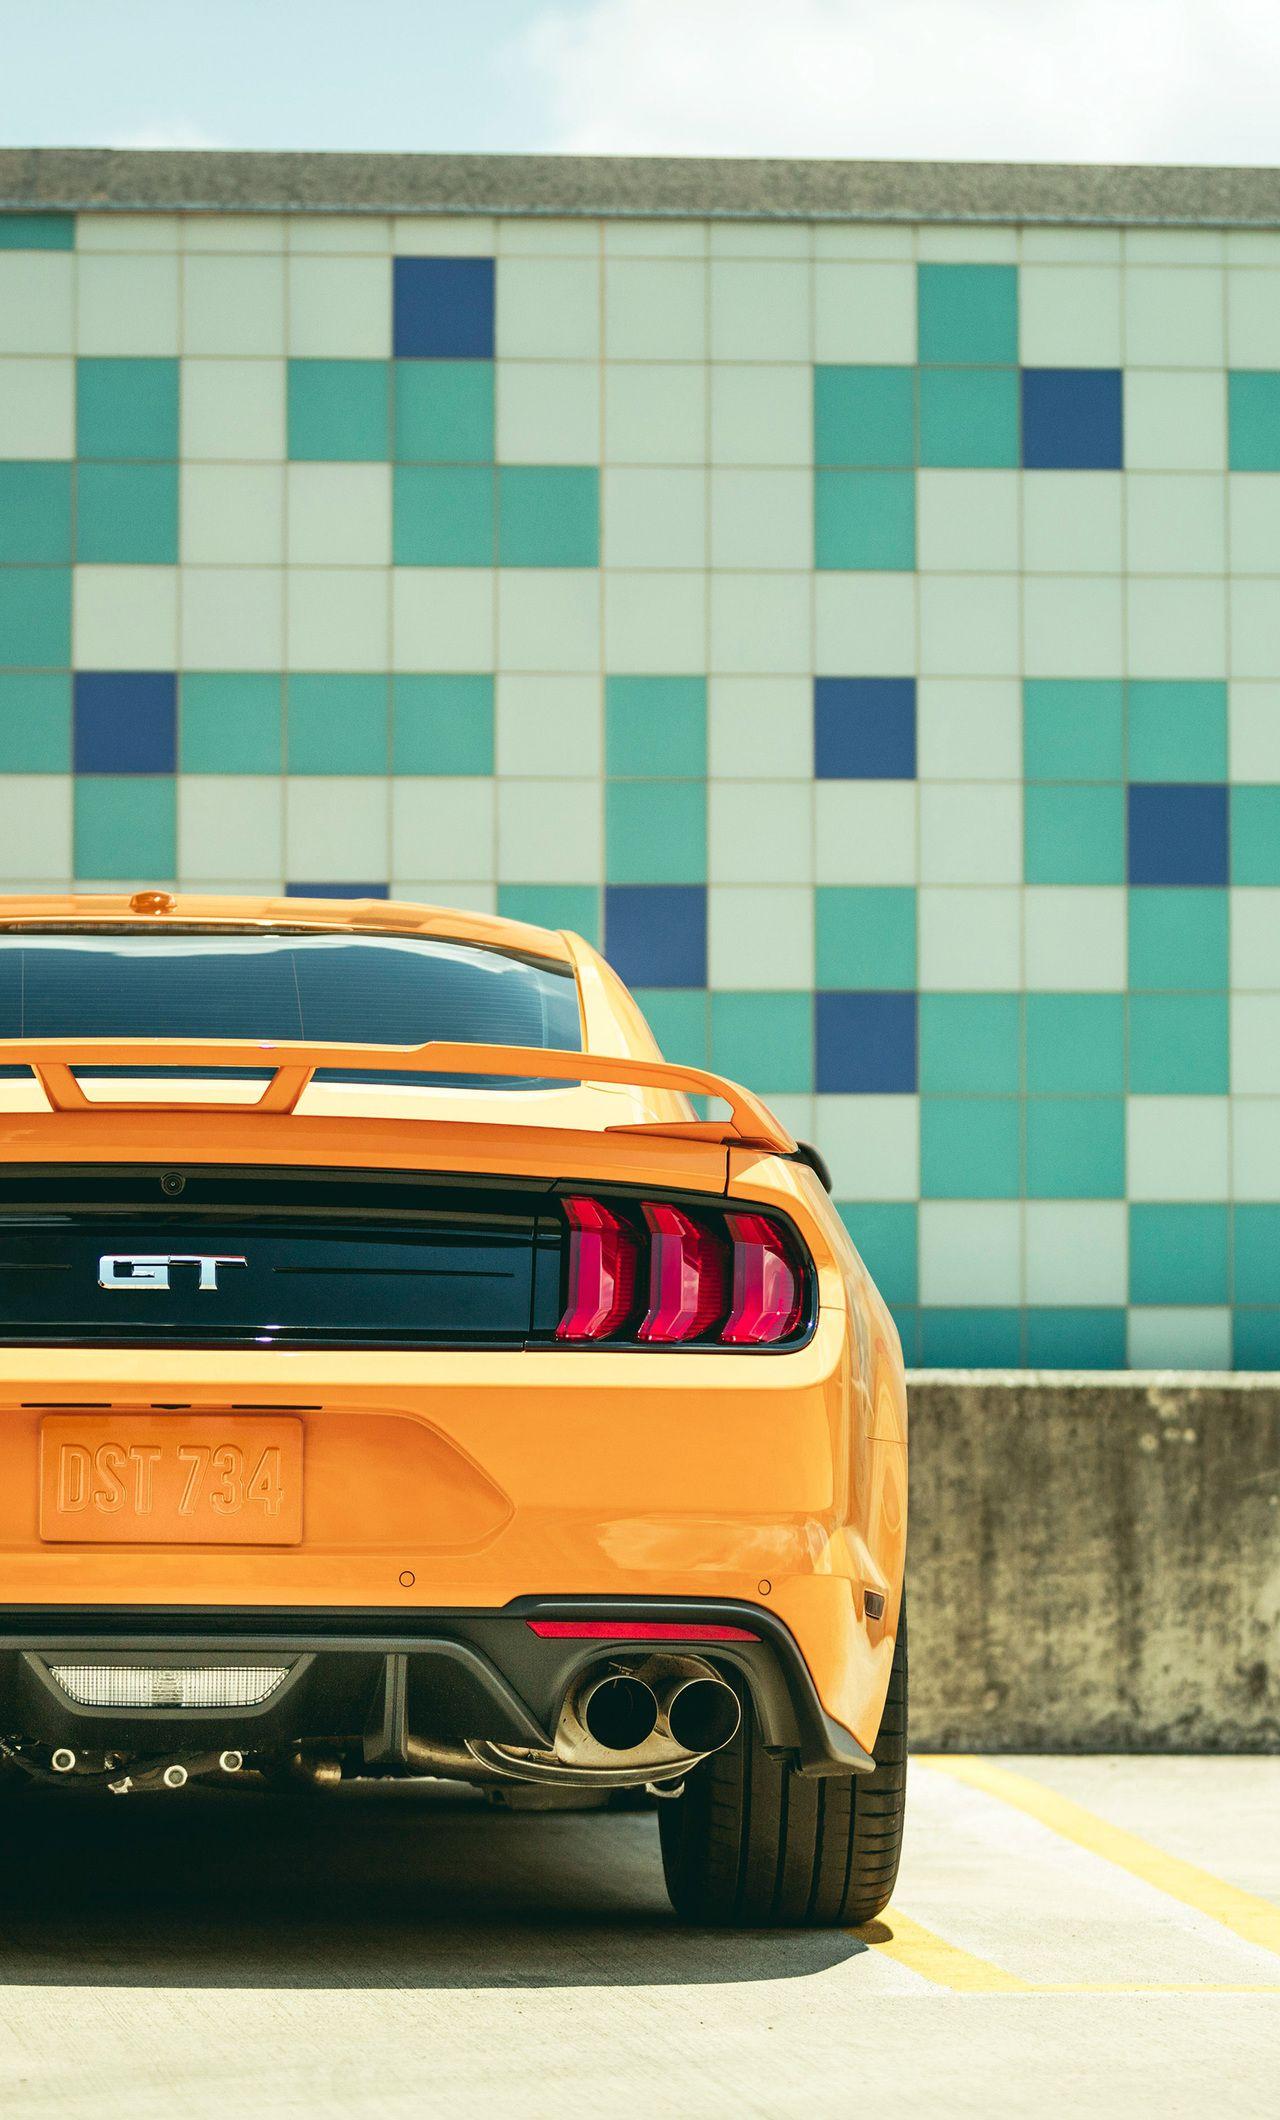 Download wallpaper 750x1334 yellow ford mustang gt 2020 iphone 7 iphone  8 750x1334 hd background 24213